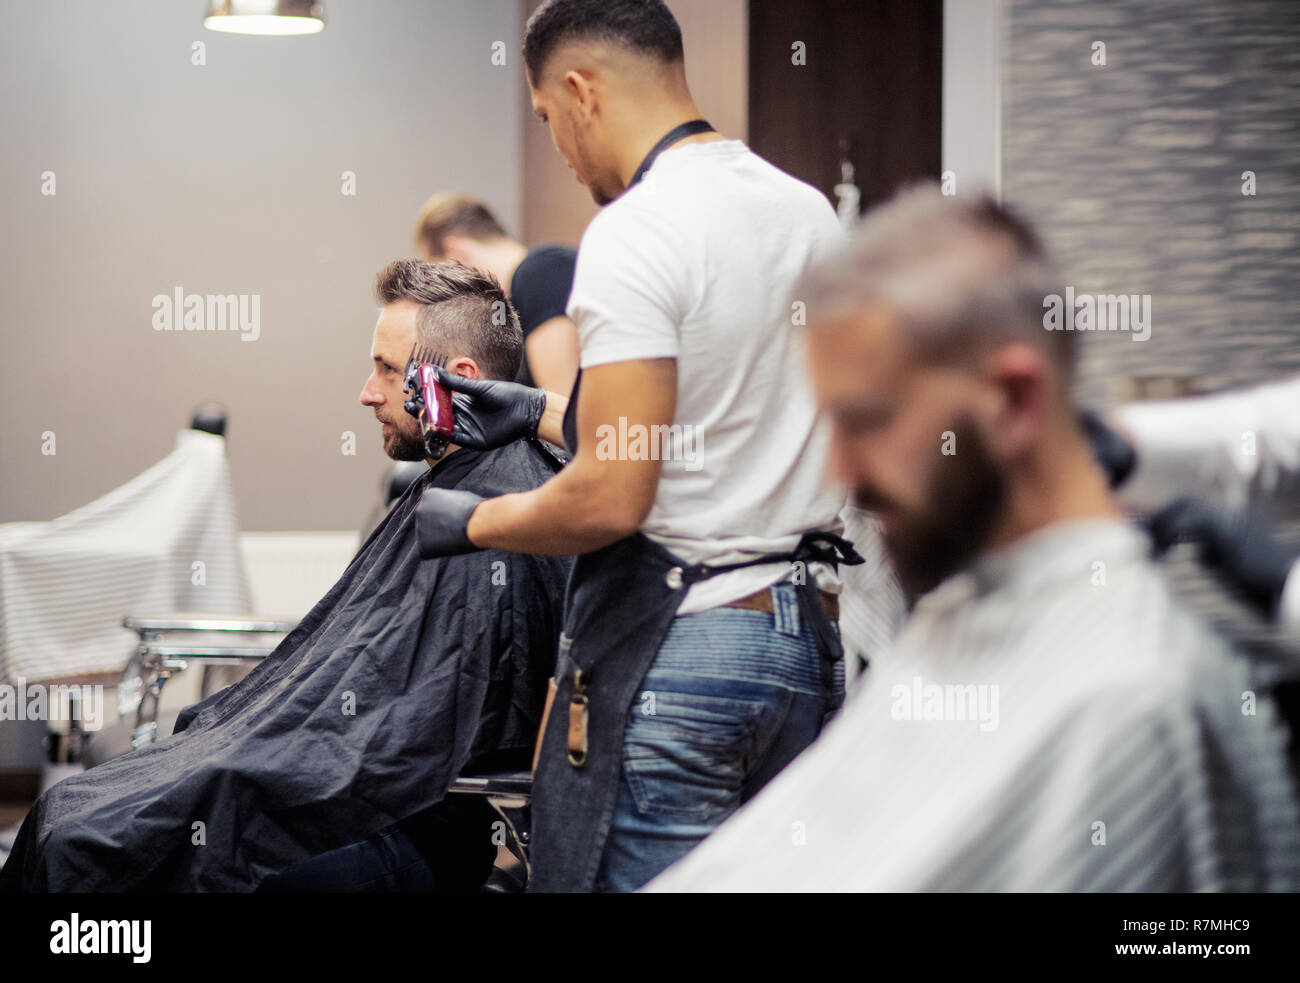 Man clients visiting haidresser and hairstylist in barber shop. Stock Photo